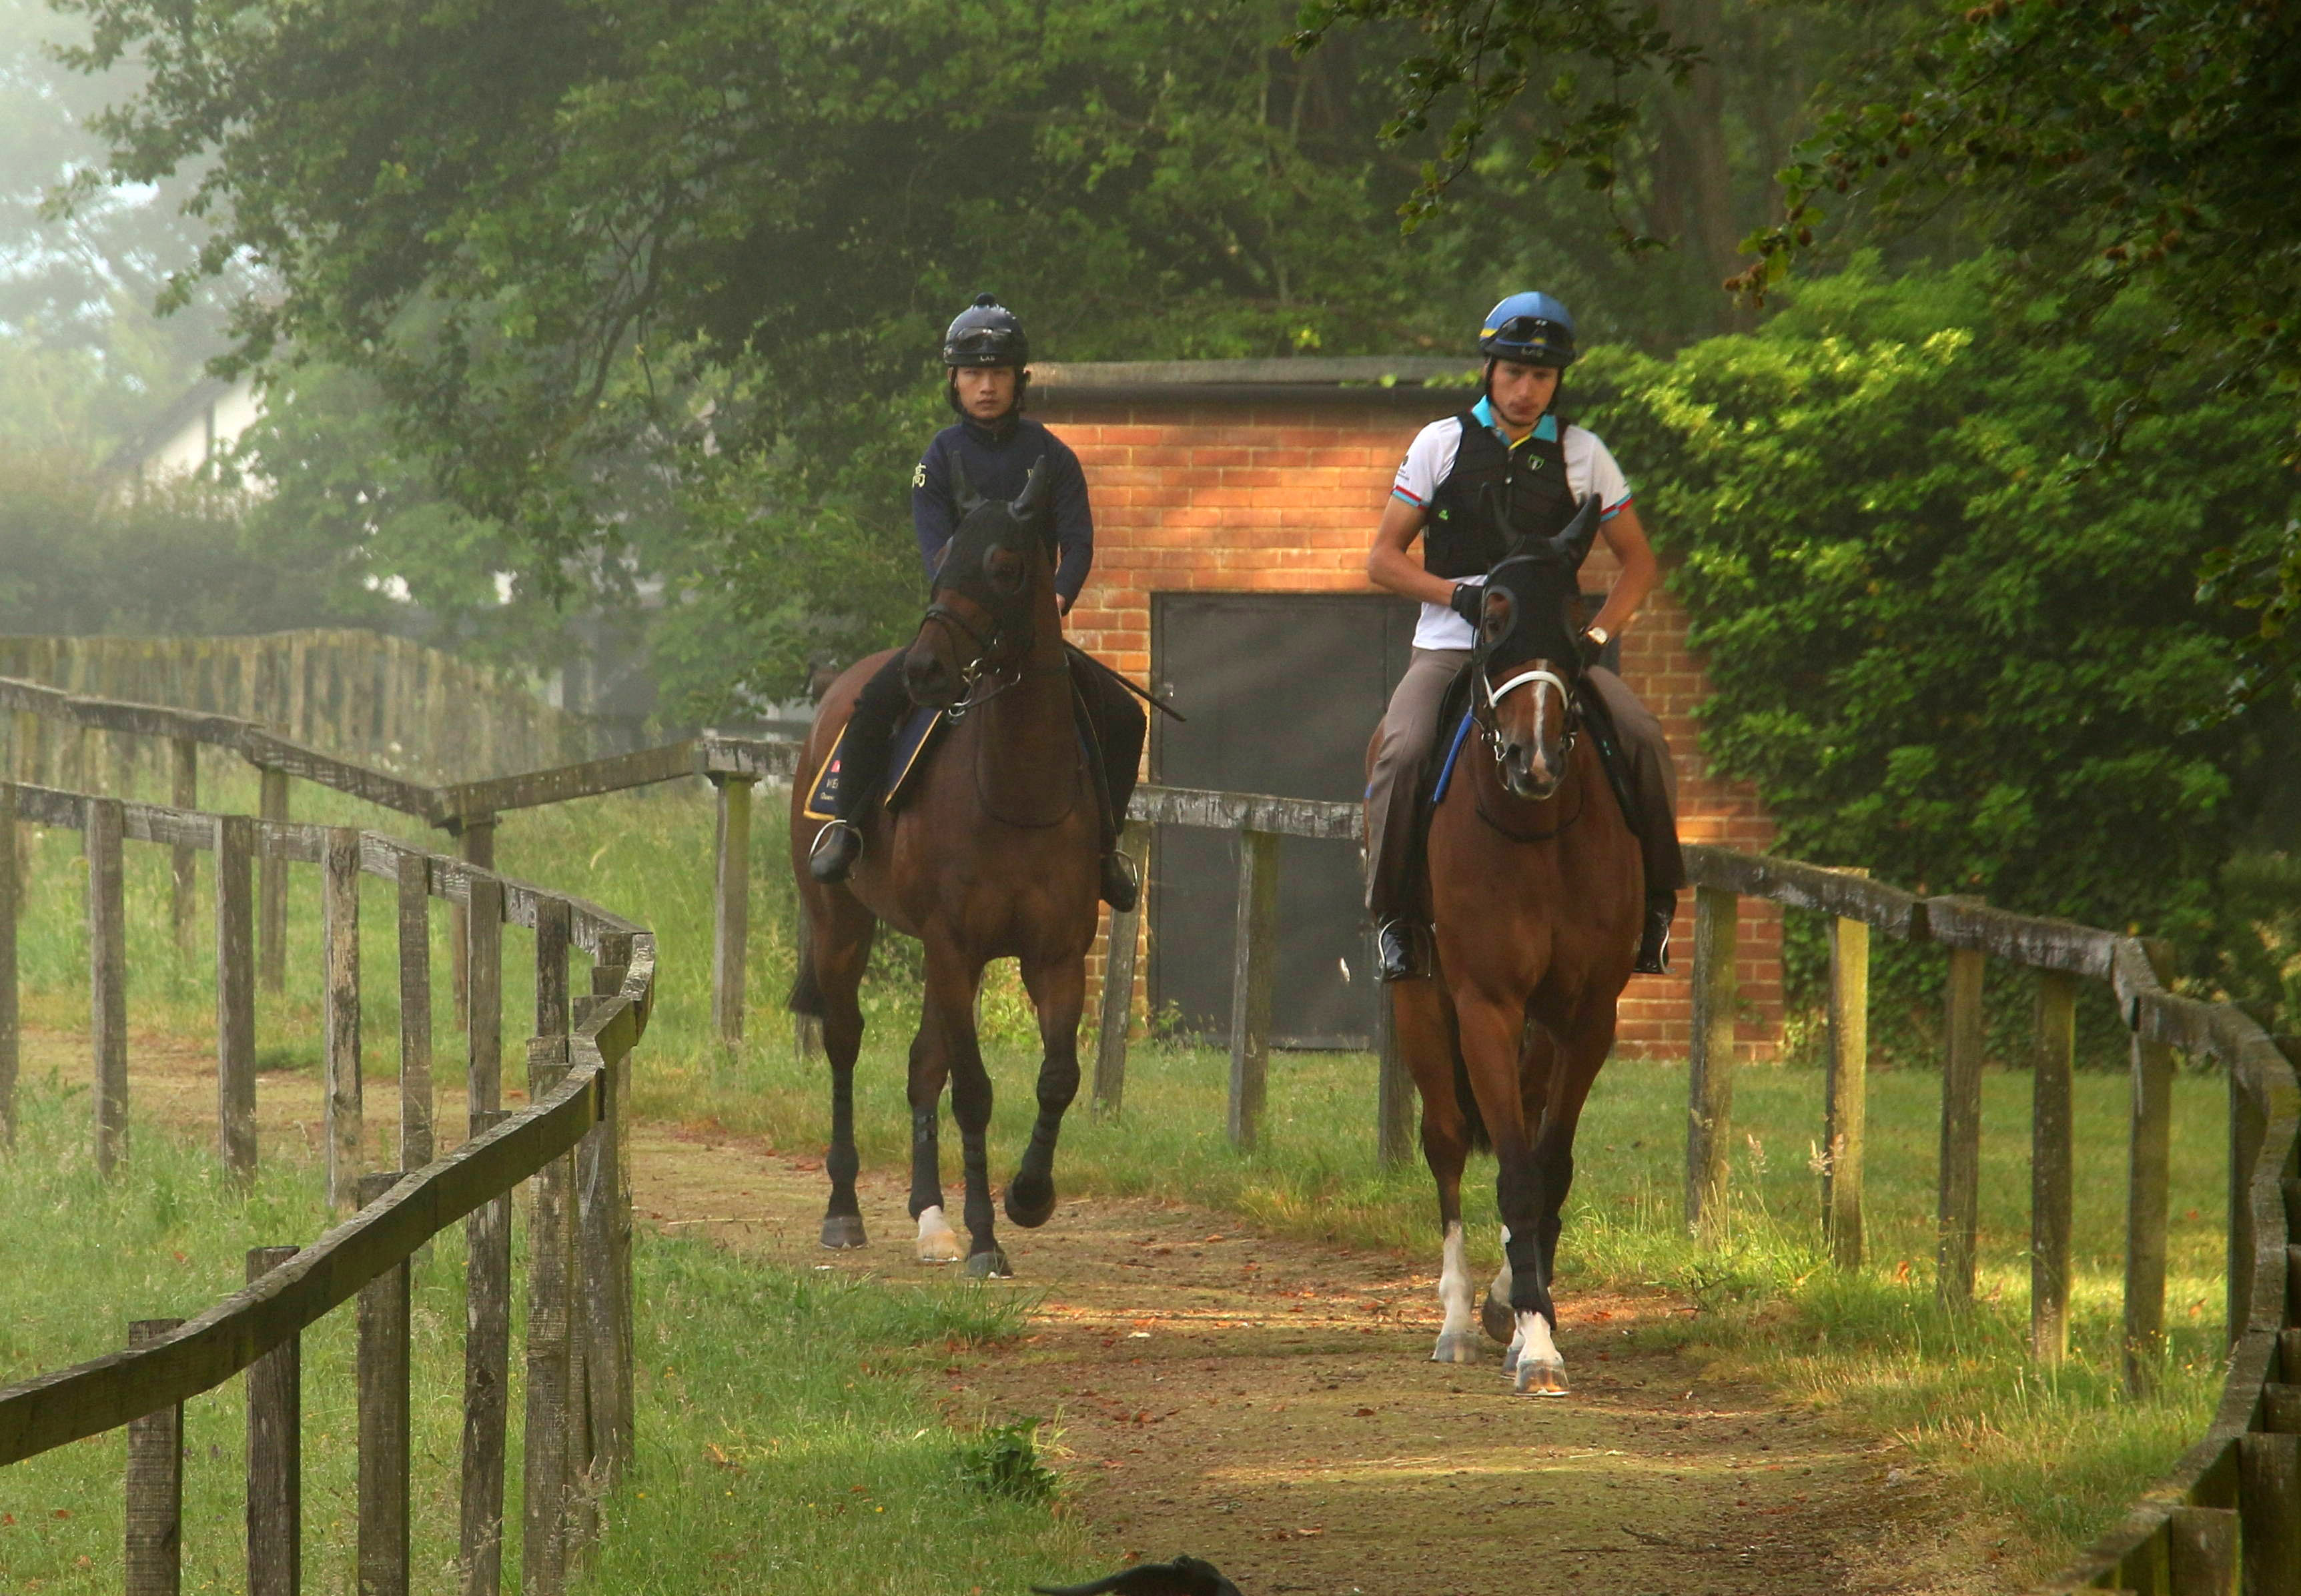 Wellington (left) and his companion Kwaichung Brothers head out to gallop at Manton Estate on Thursday morning. Photos: Pun Kwan